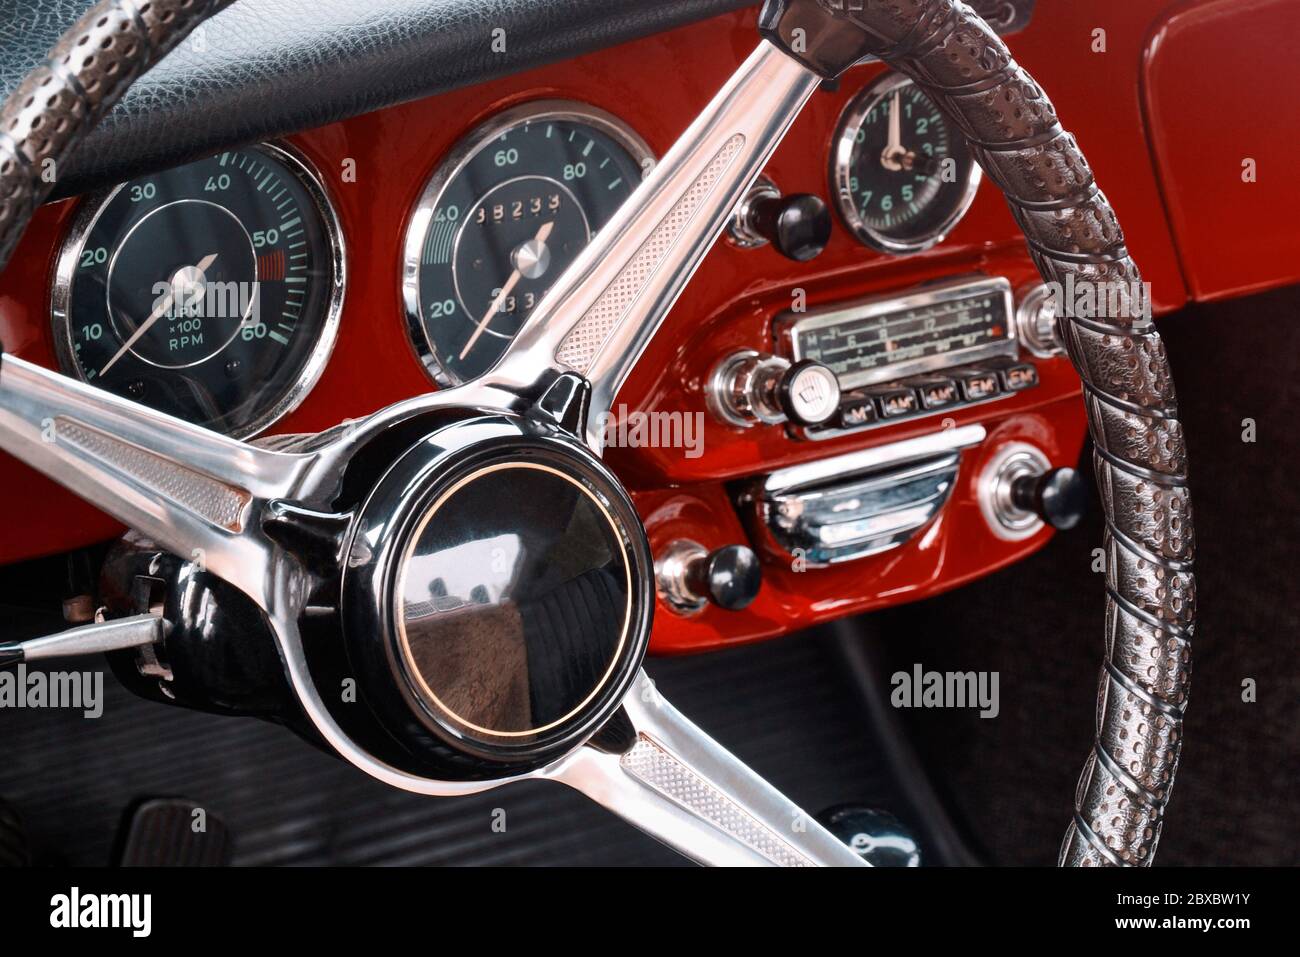 Steering wheel, speedometer, revs, clock dials, radio scale, buttons and knobs on front panel red coupe old timer sports car Stock Photo